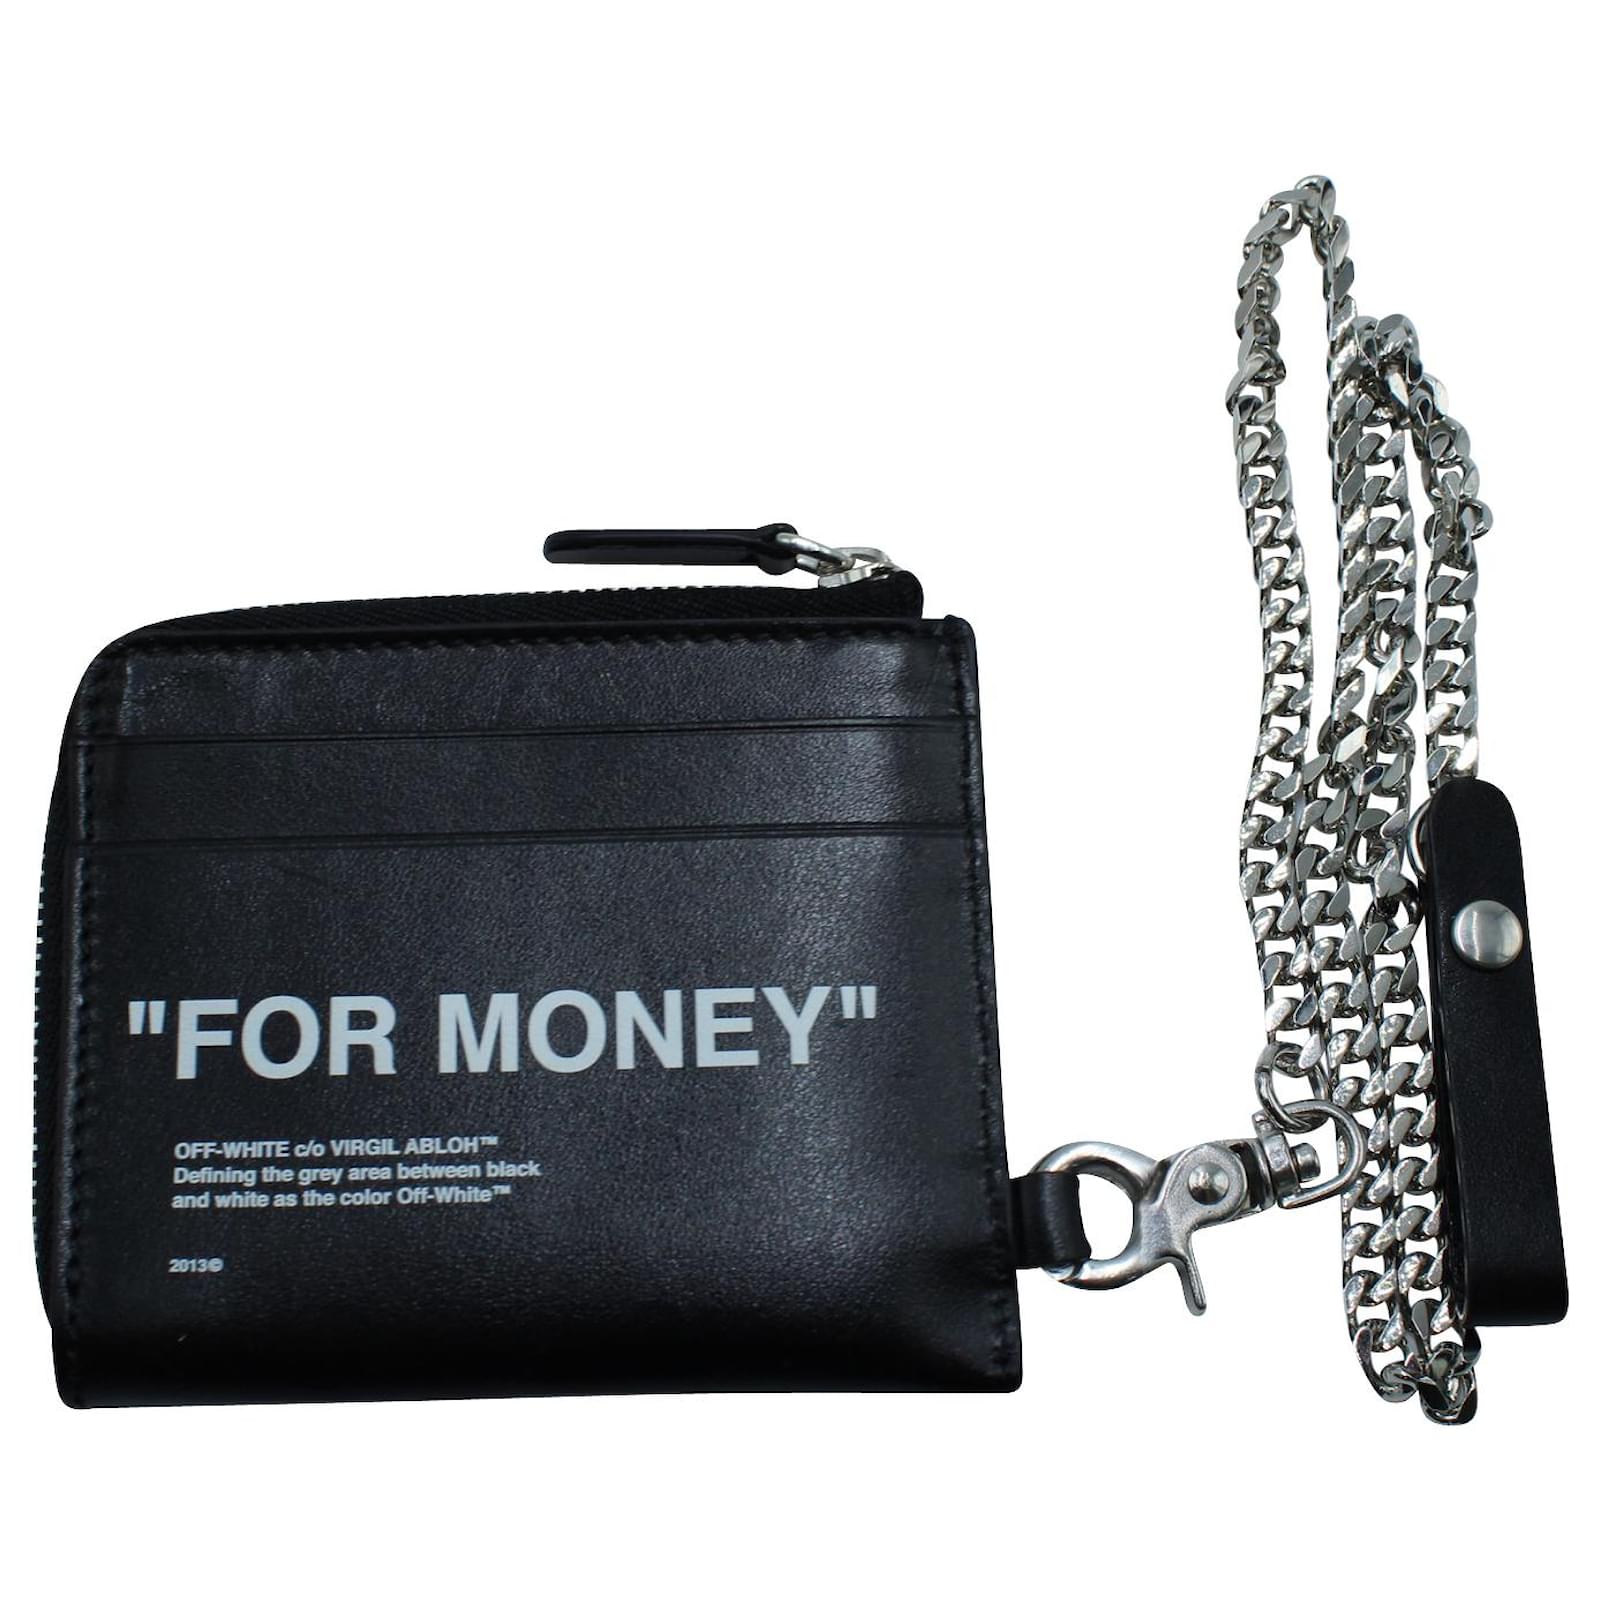 Off White Off-White "For Money" Chain Wallet in Black Leather ref